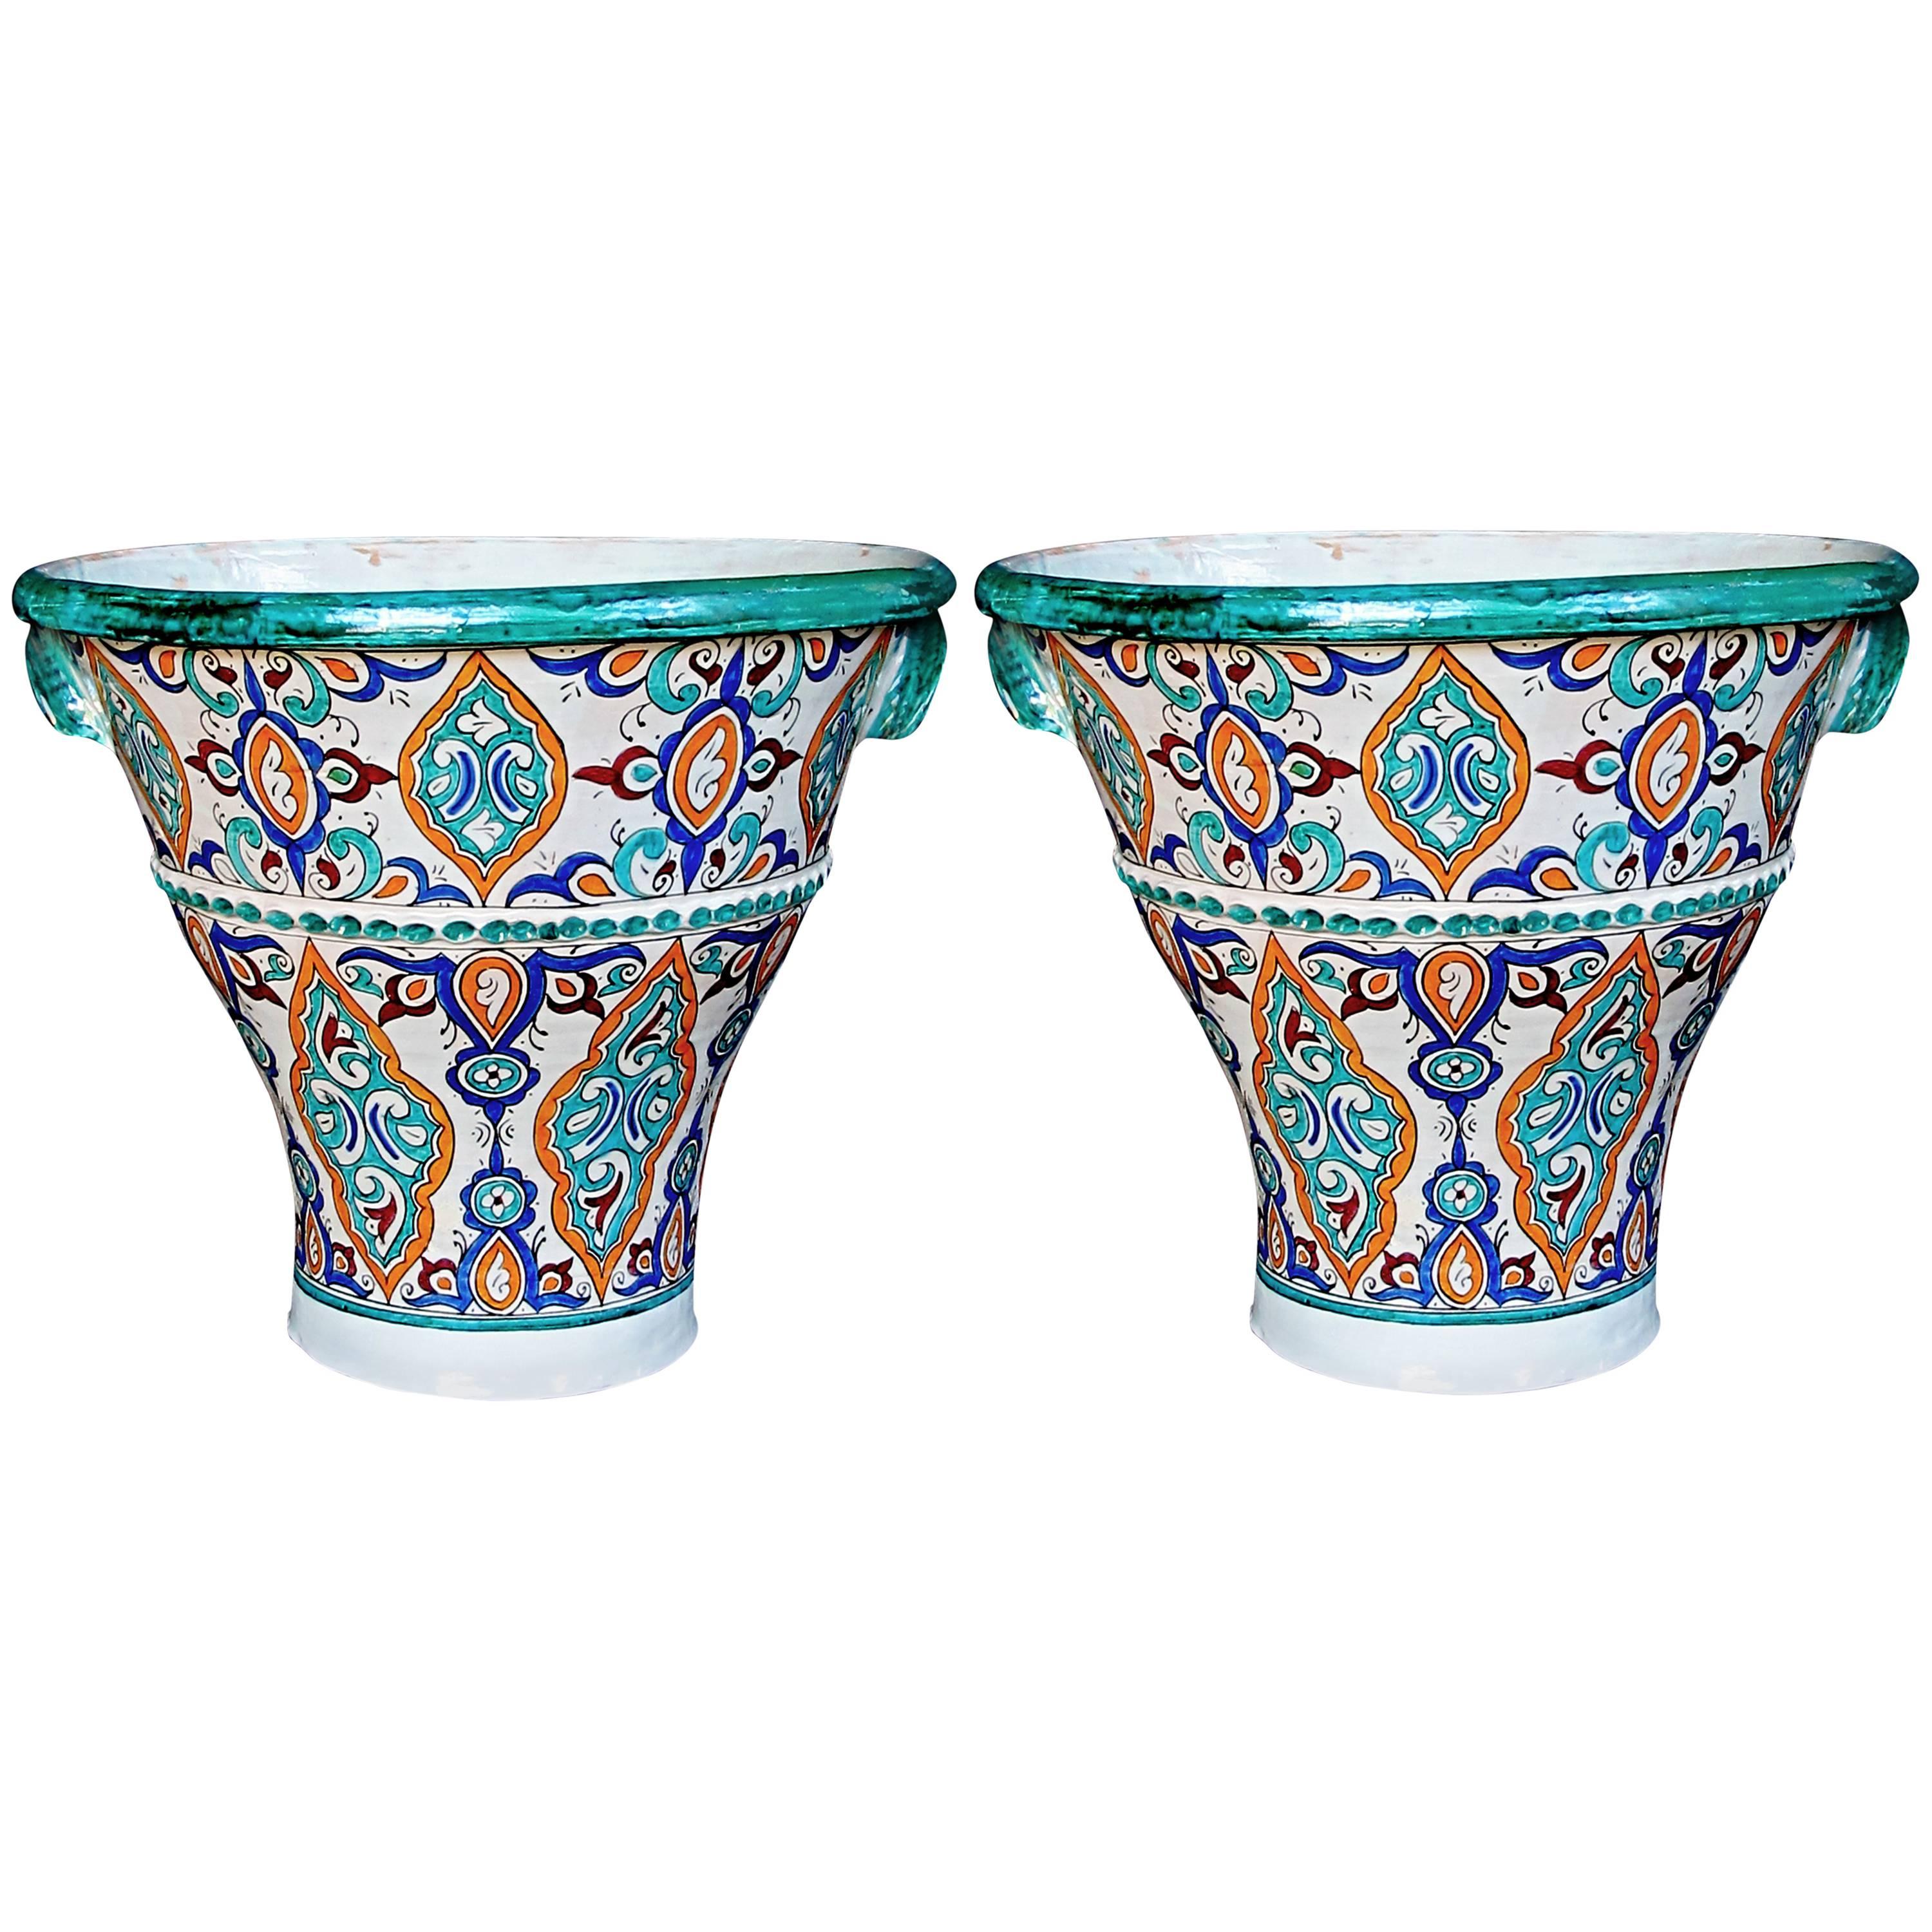 Vibrantly Glazed Pair of Moroccan Conical-Form Double Handled Pots; Fez Morocco